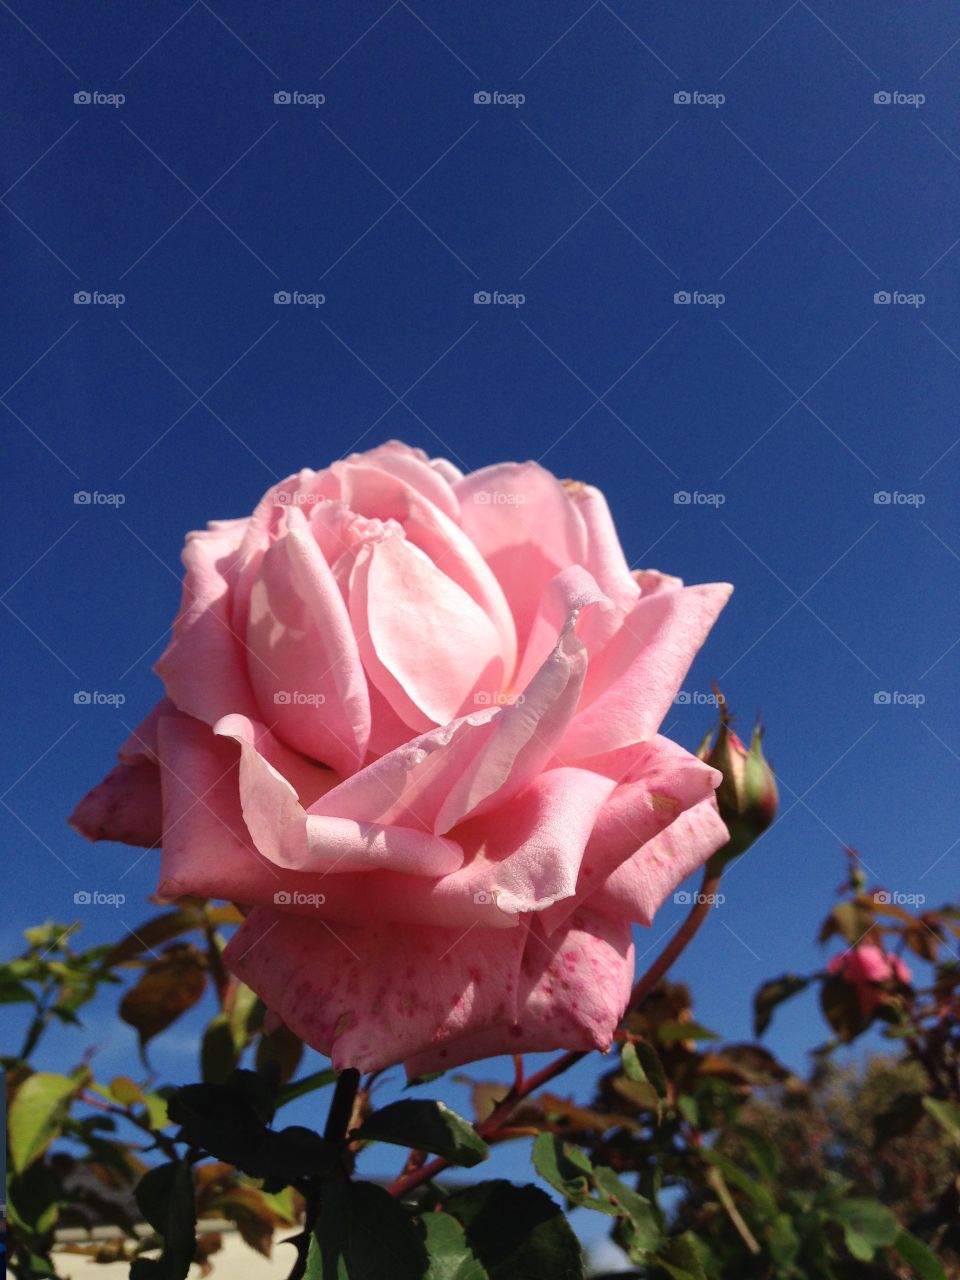 Close up of a pink rose against bright blue sky, rose buds in background, cultivated flower